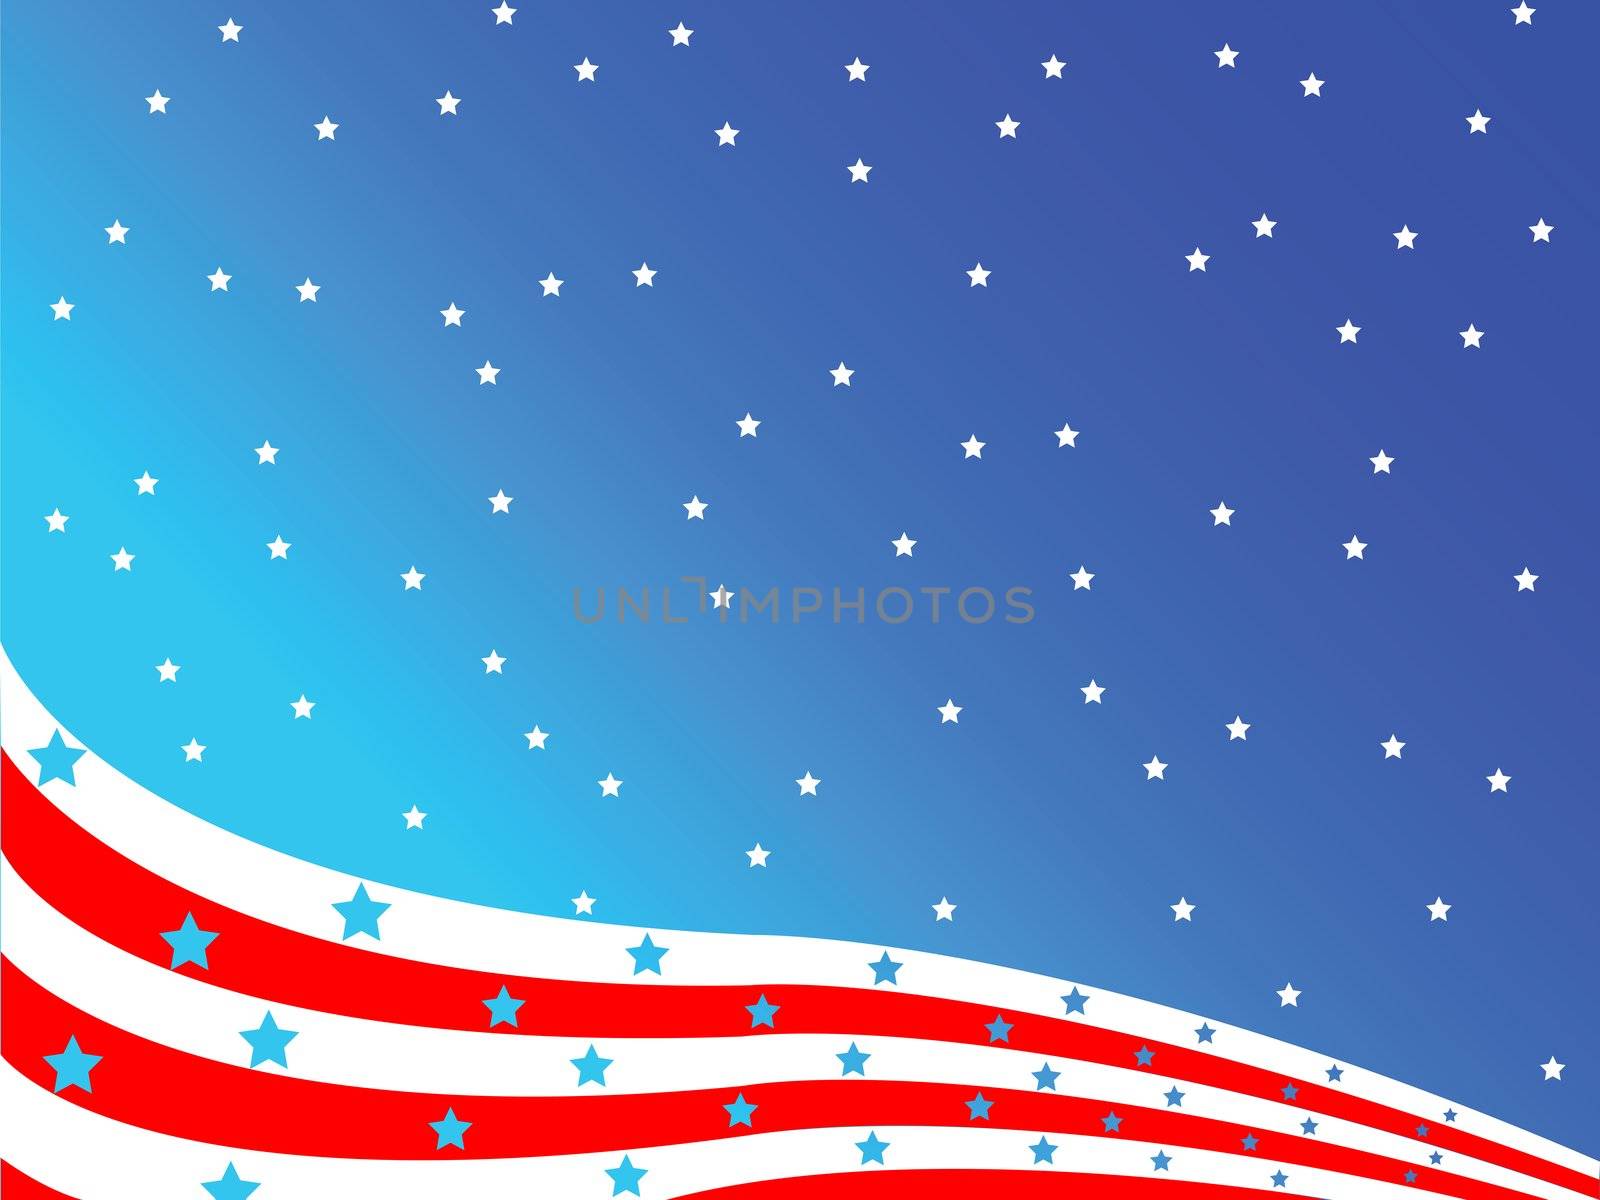 stylized american flag, vector art illustration; easy to modify colors or background